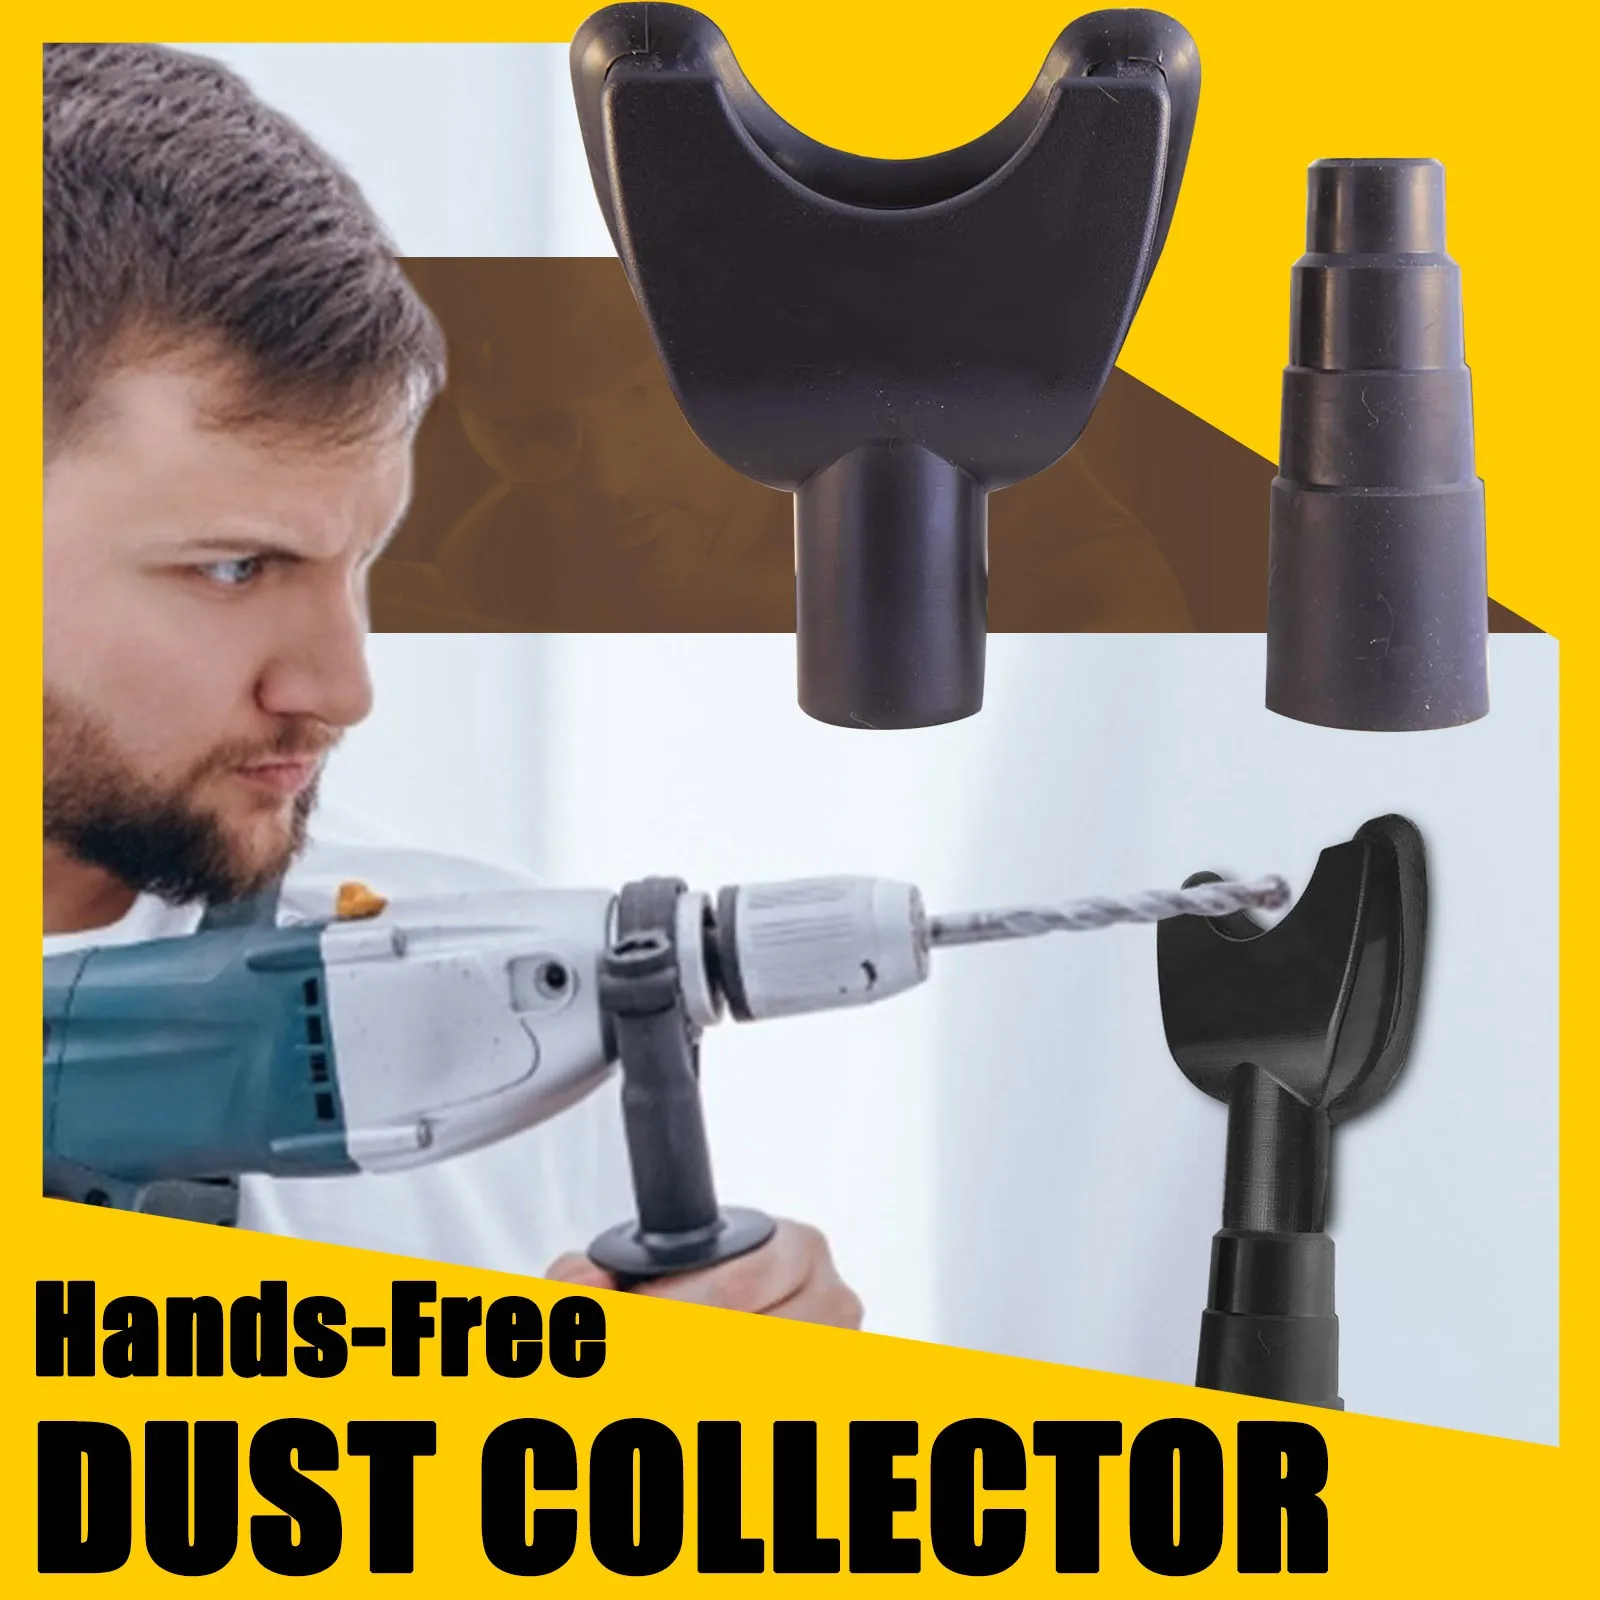 Hands-Free Dust Collectors,2 Pcs Drill Dust Extraction Tool,Electric Drill Dust Collector-Works with All Drill Types